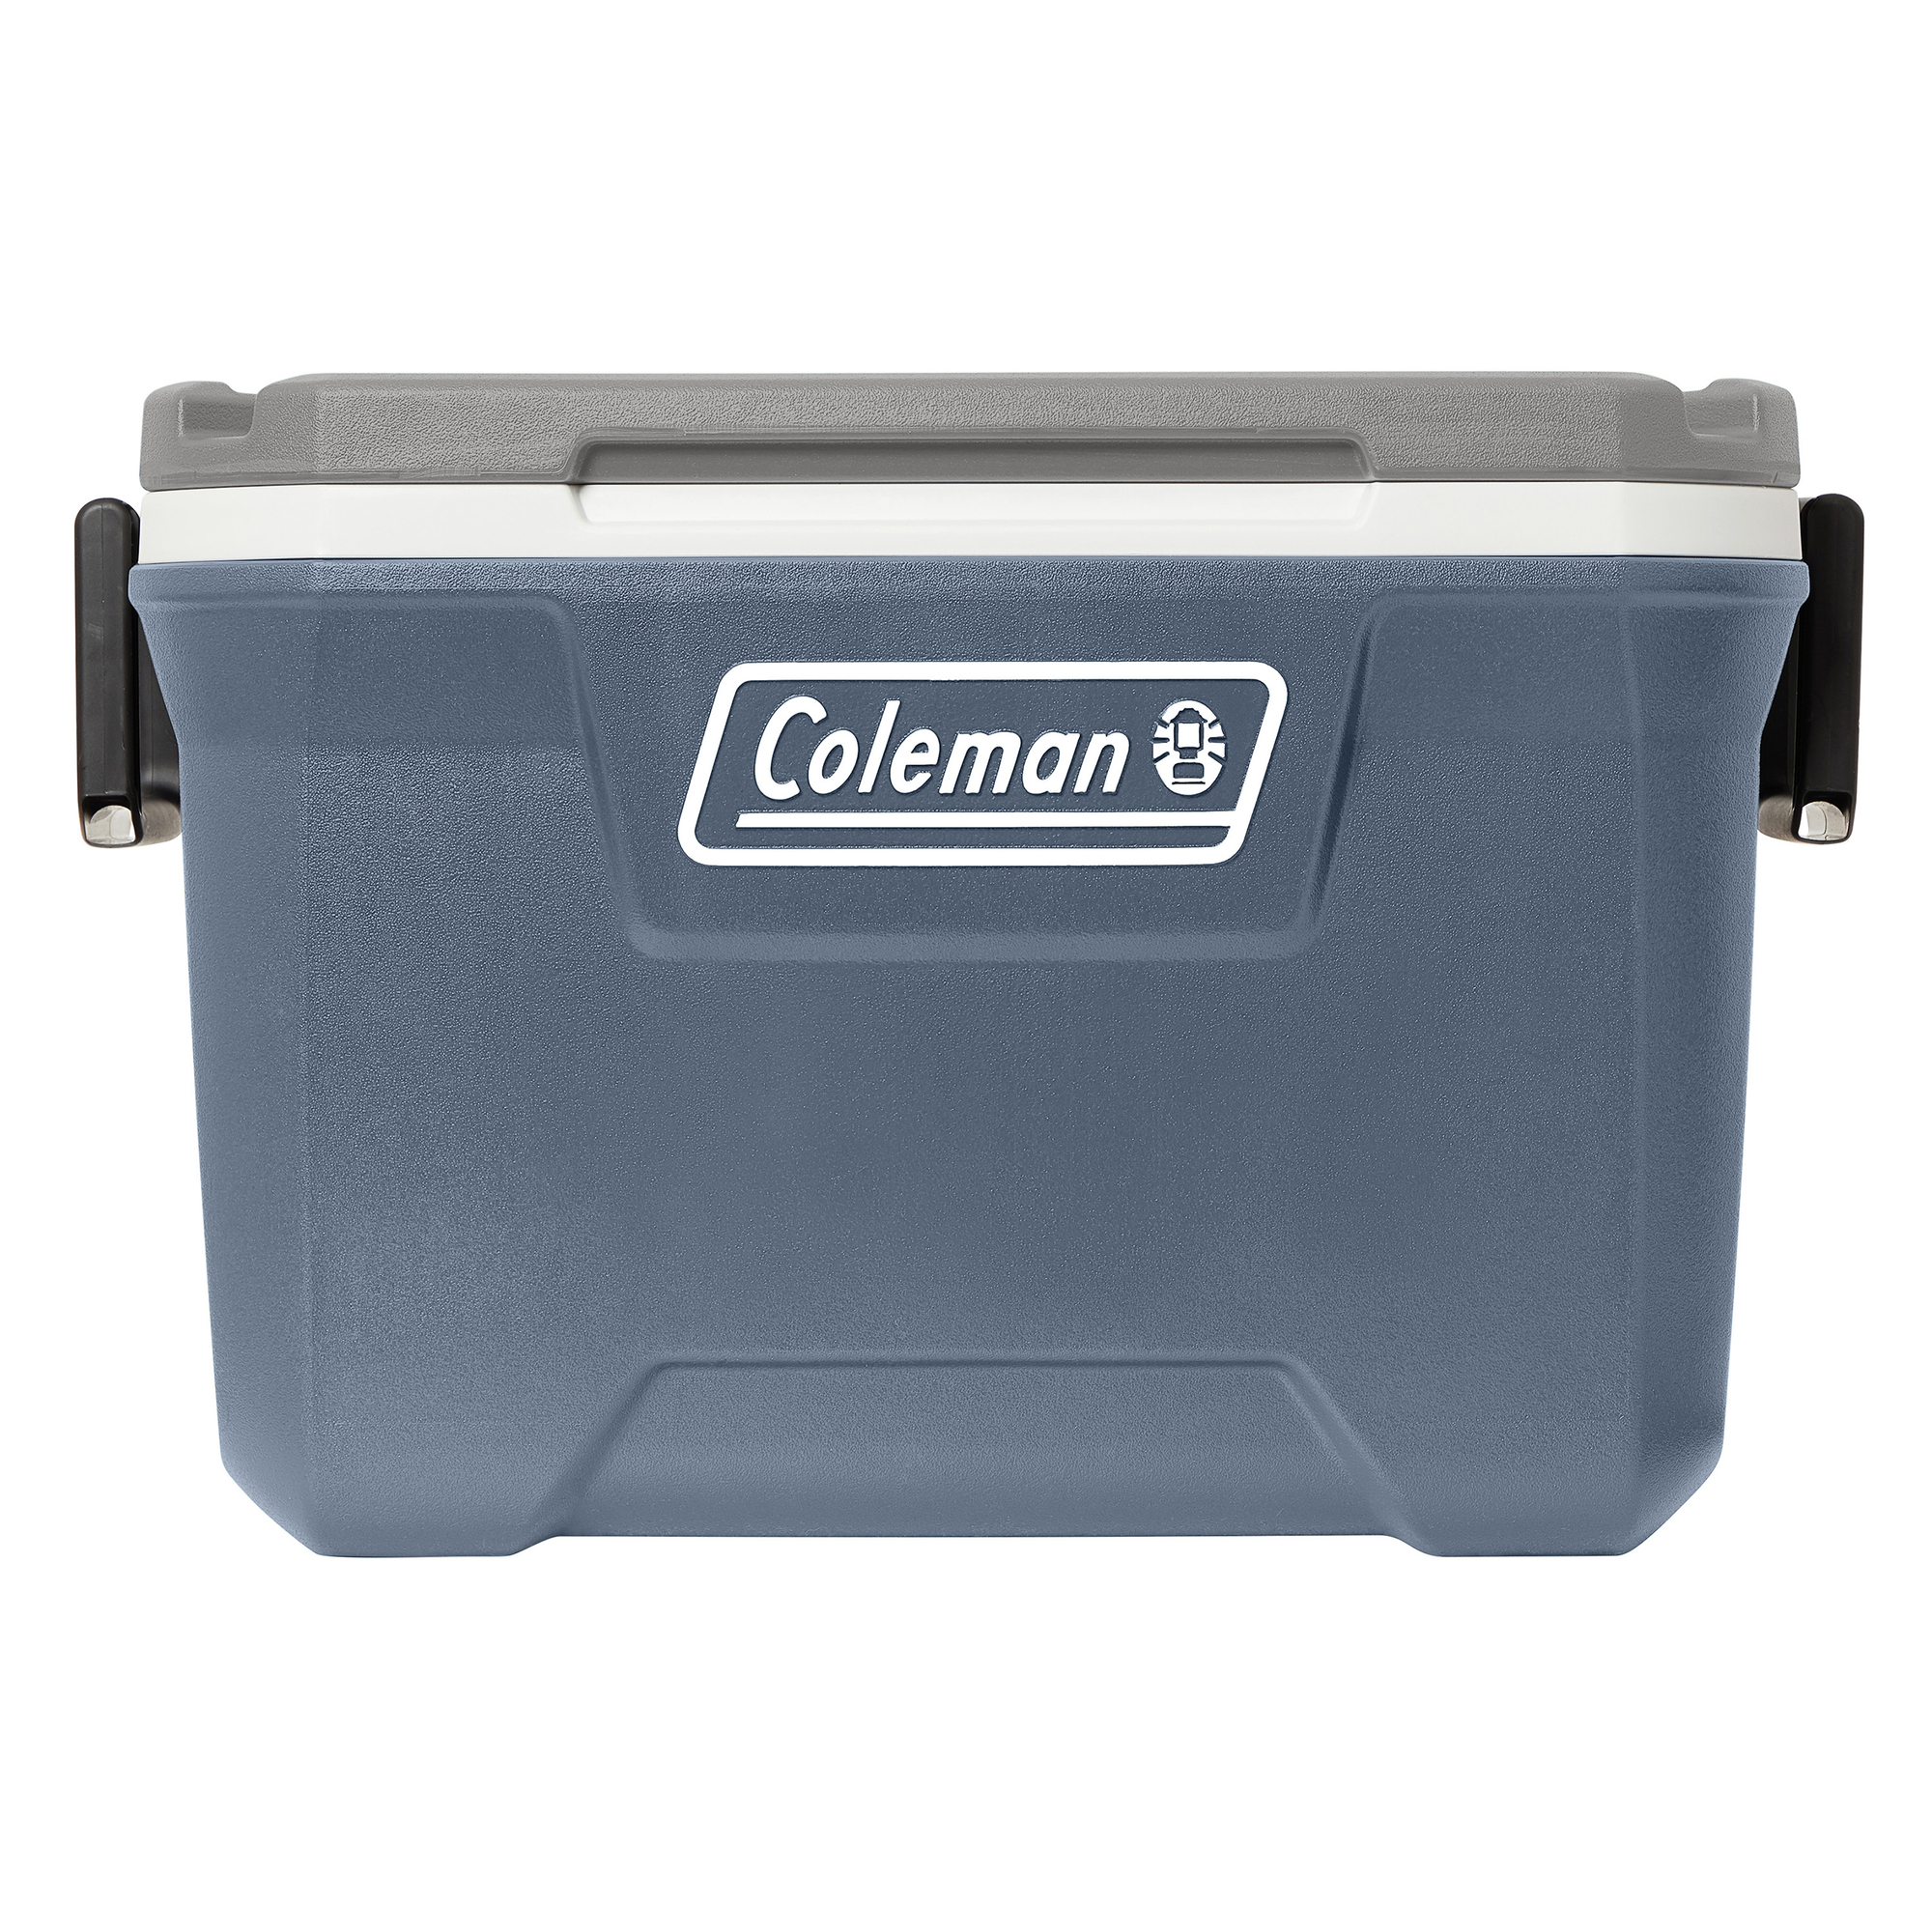 Coleman 316 Series 52QT Ice Chest Hard Cooler, Lakeside Blue - image 1 of 13